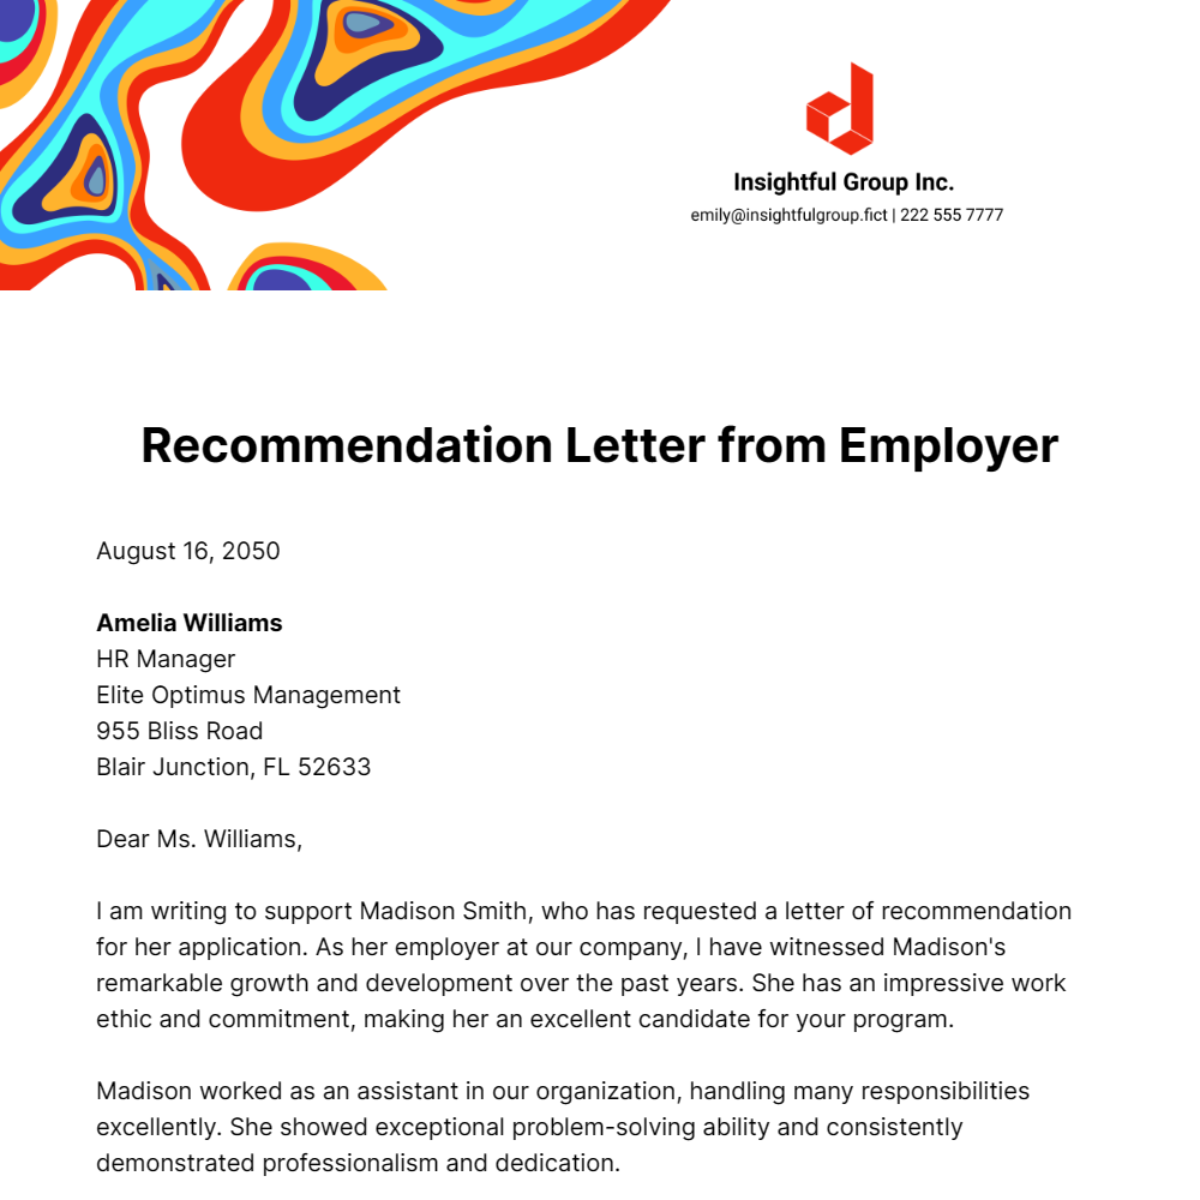 Recommendation Letter from Employer Template